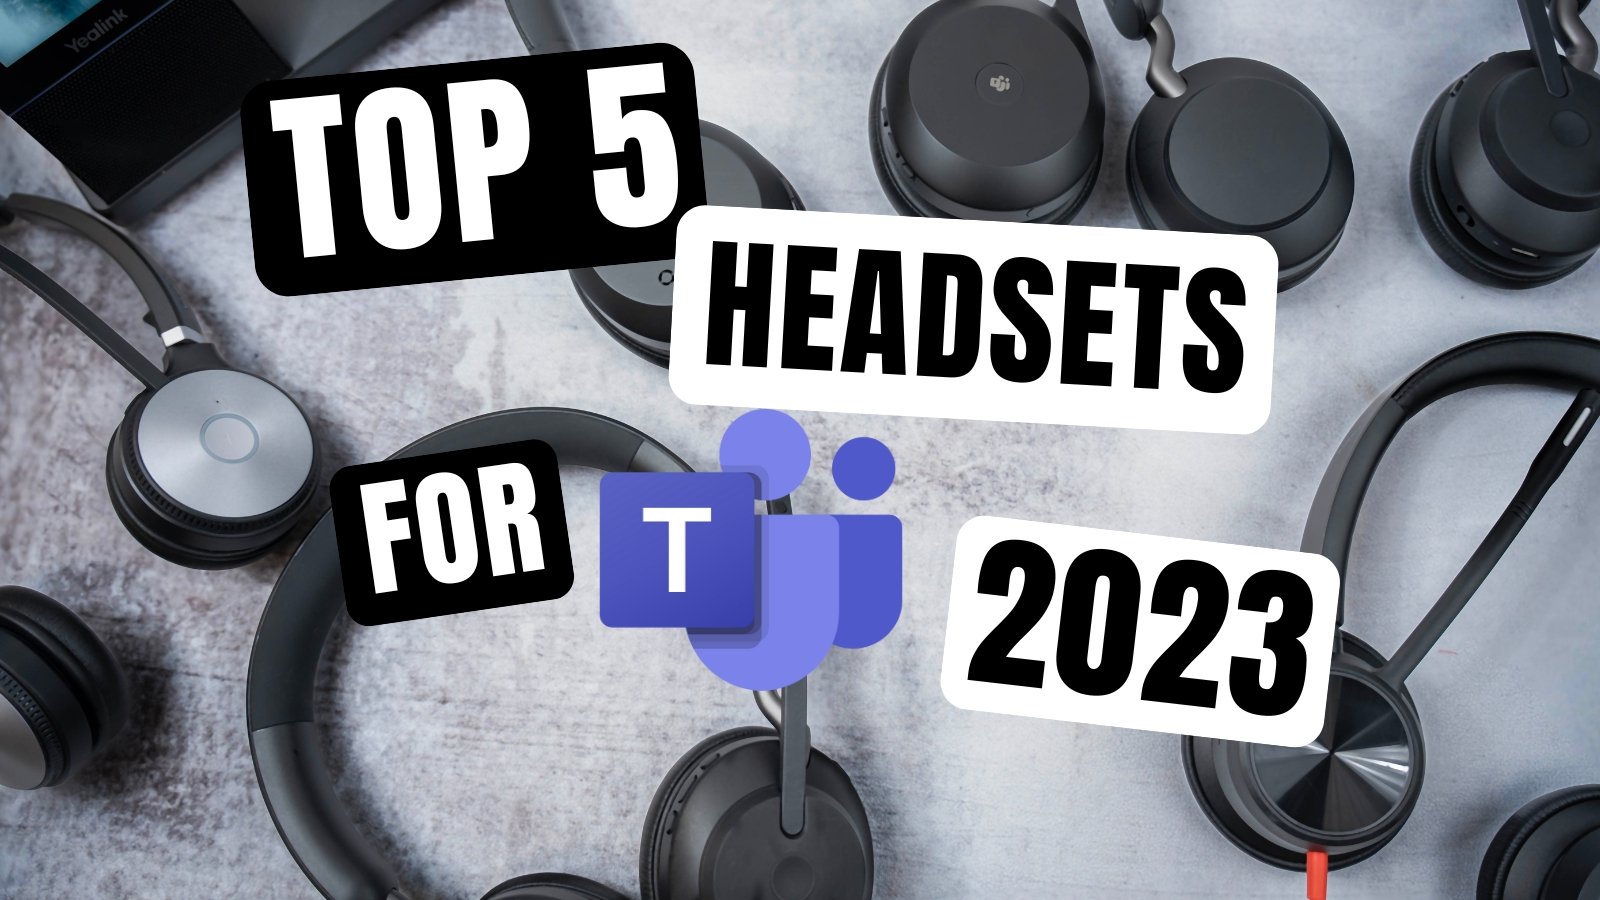 Best over-ear headphones in 2023 tried and tested